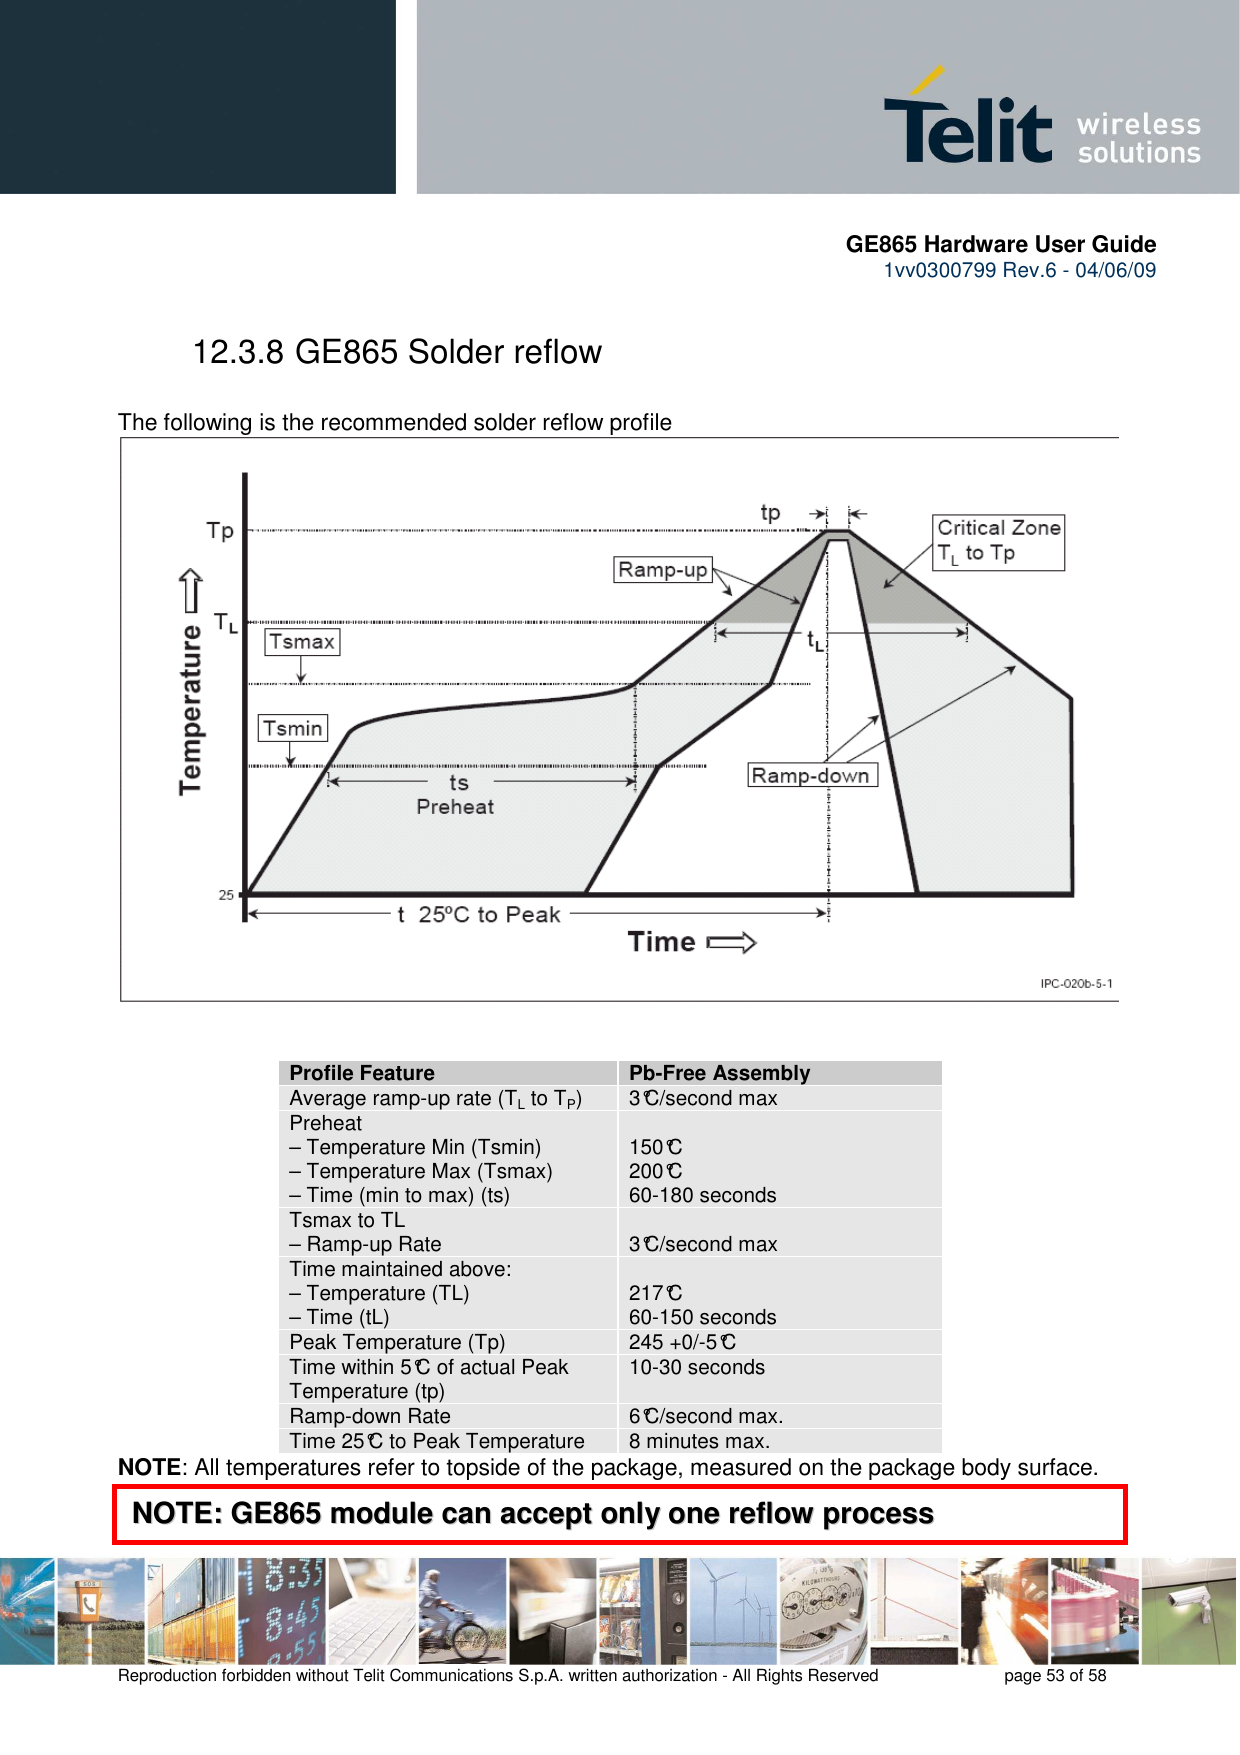       GE865 Hardware User Guide 1vv0300799 Rev.6 - 04/06/09      Reproduction forbidden without Telit Communications S.p.A. written authorization - All Rights Reserved    page 53 of 58  12.3.8 GE865 Solder reflow  The following is the recommended solder reflow profile   Profile Feature Pb-Free Assembly Average ramp-up rate (TL to TP)  3°C/second max Preheat – Temperature Min (Tsmin) – Temperature Max (Tsmax) – Time (min to max) (ts)  150°C 200°C 60-180 seconds Tsmax to TL – Ramp-up Rate   3°C/second max Time maintained above: – Temperature (TL) – Time (tL)  217°C 60-150 seconds Peak Temperature (Tp)  245 +0/-5°C Time within 5°C of actual Peak Temperature (tp)  10-30 seconds  Ramp-down Rate  6°C/second max. Time 25°C to Peak Temperature  8 minutes max. NOTE: All temperatures refer to topside of the package, measured on the package body surface.   NNOOTTEE::  GGEE886655  mmoodduullee  ccaann  aacccceepptt  oonnllyy  oonnee  rreeffllooww  pprroocceessss   